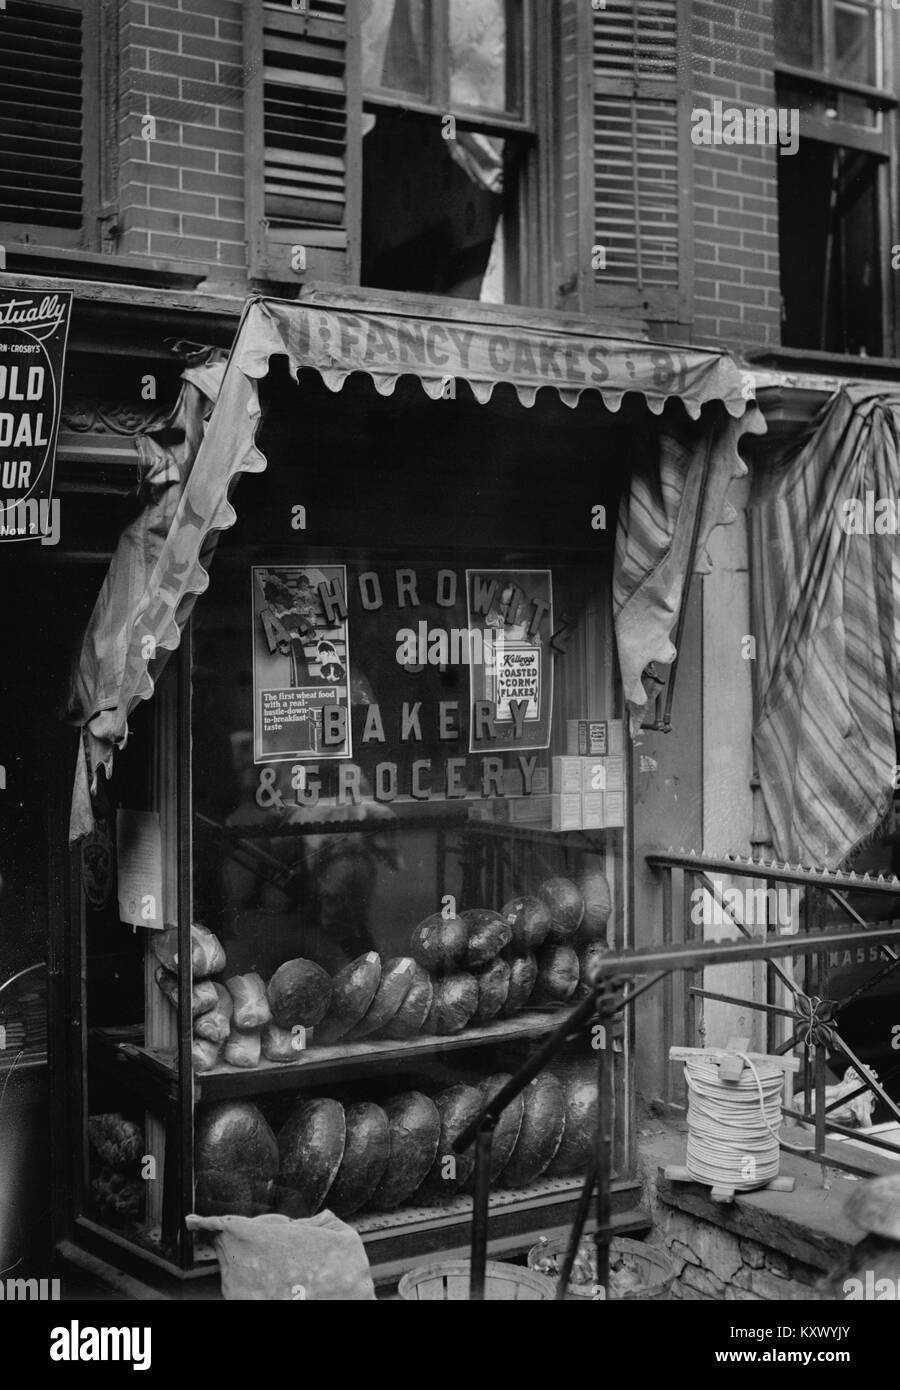 Rye, Pumpernickel & Challah sold a Horowitz's Grocery & Bakery Stock Photo